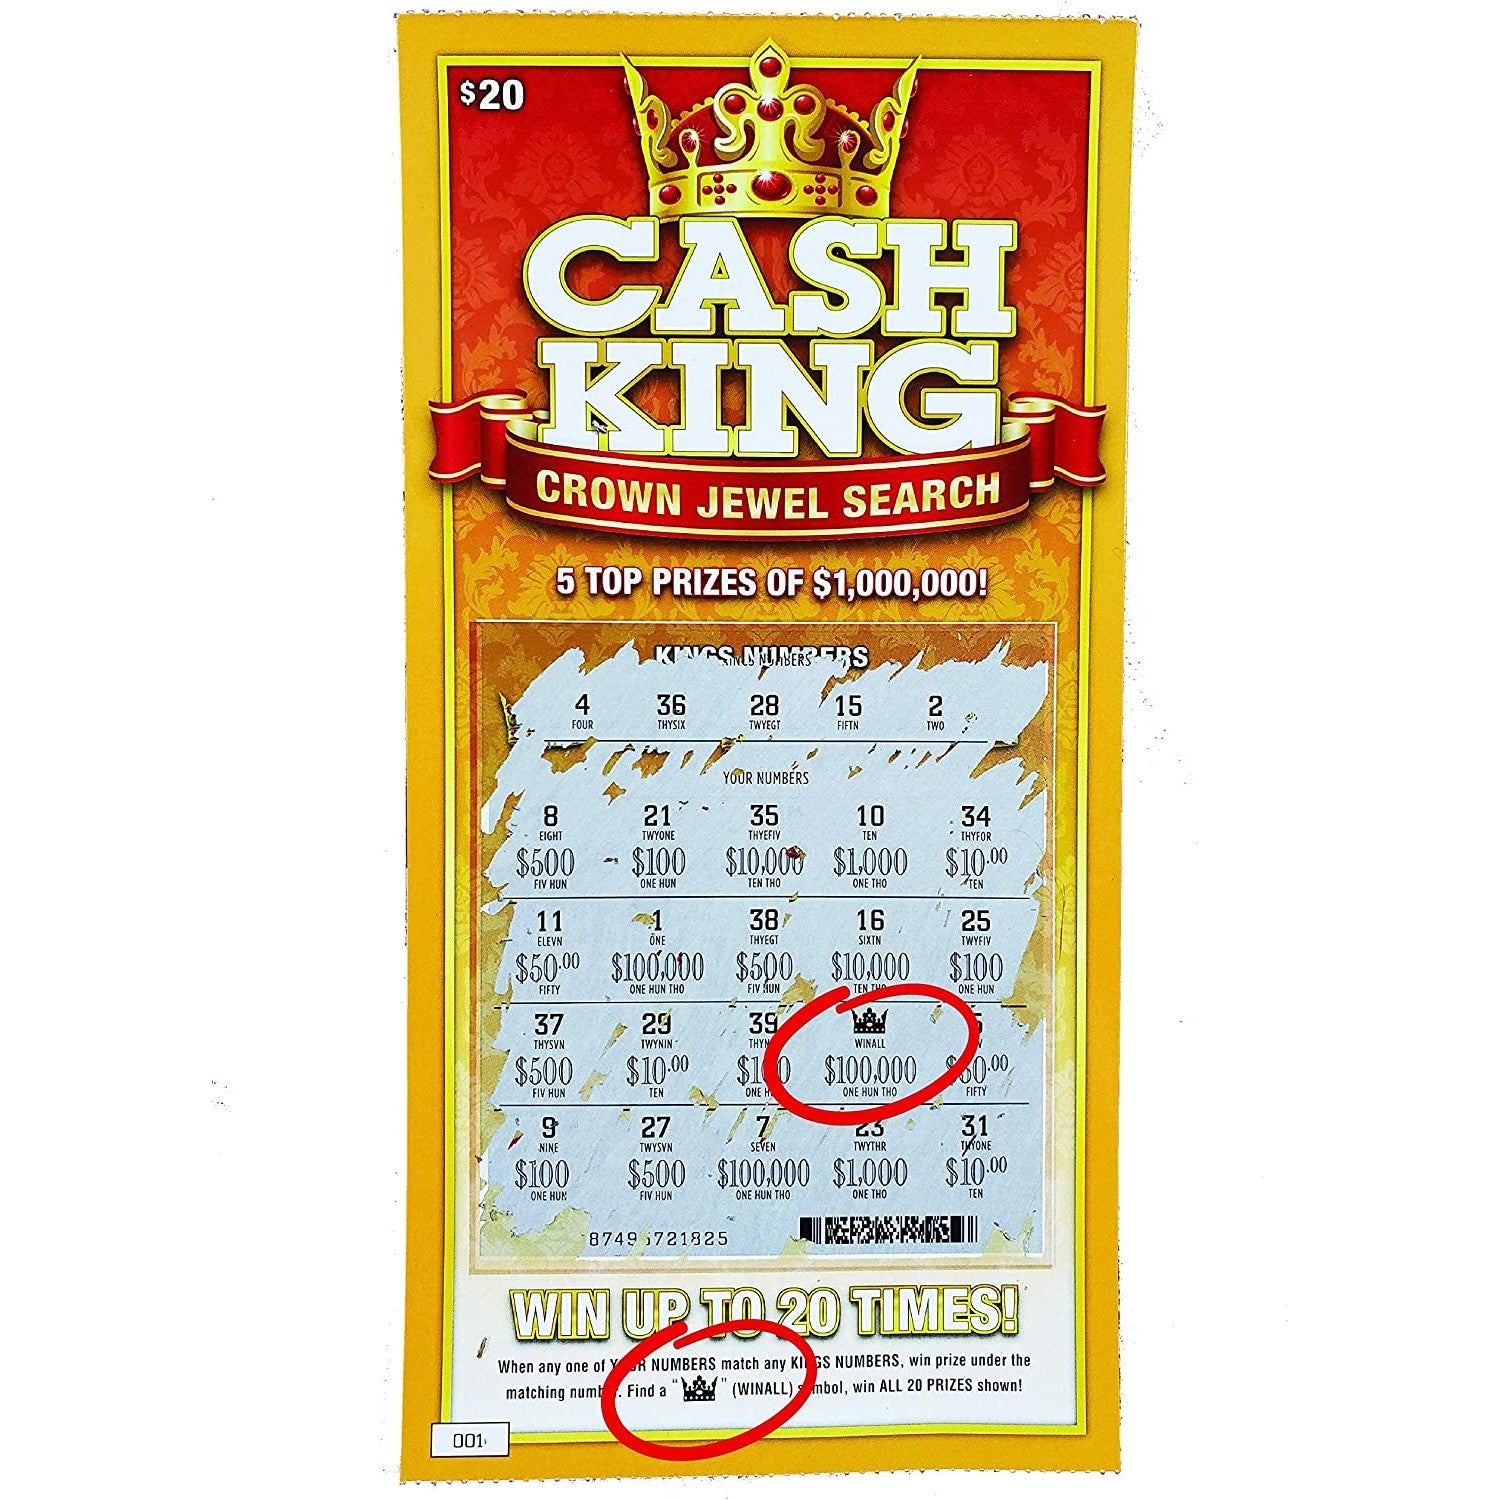 A scratch-off lottery ticket called Cash King. The ticket has been scratched off and shows a fake win of $100,000.